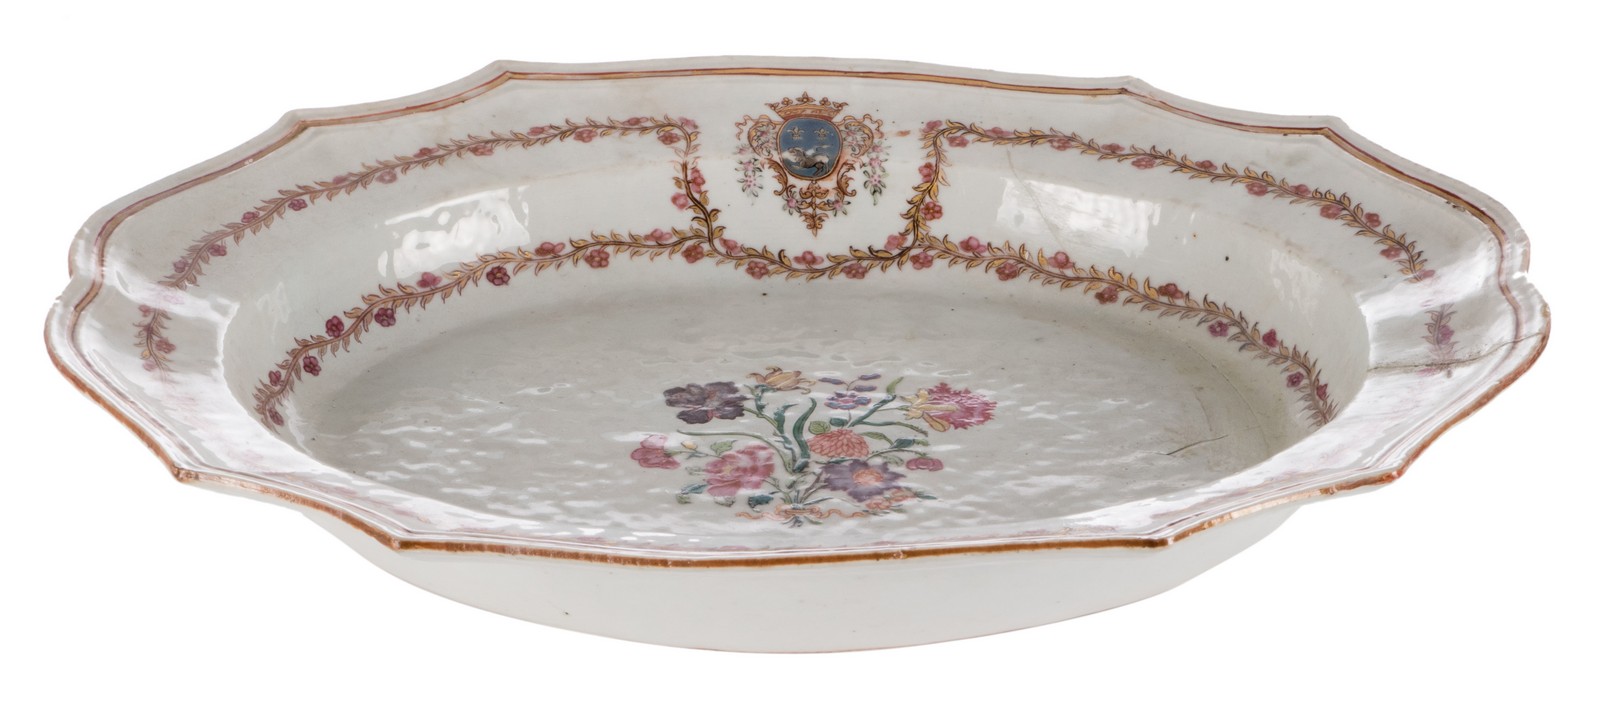 A Chinese dish with profiled edge and famille rose decorated, 18thC, 31 x 39 cm (restoration)